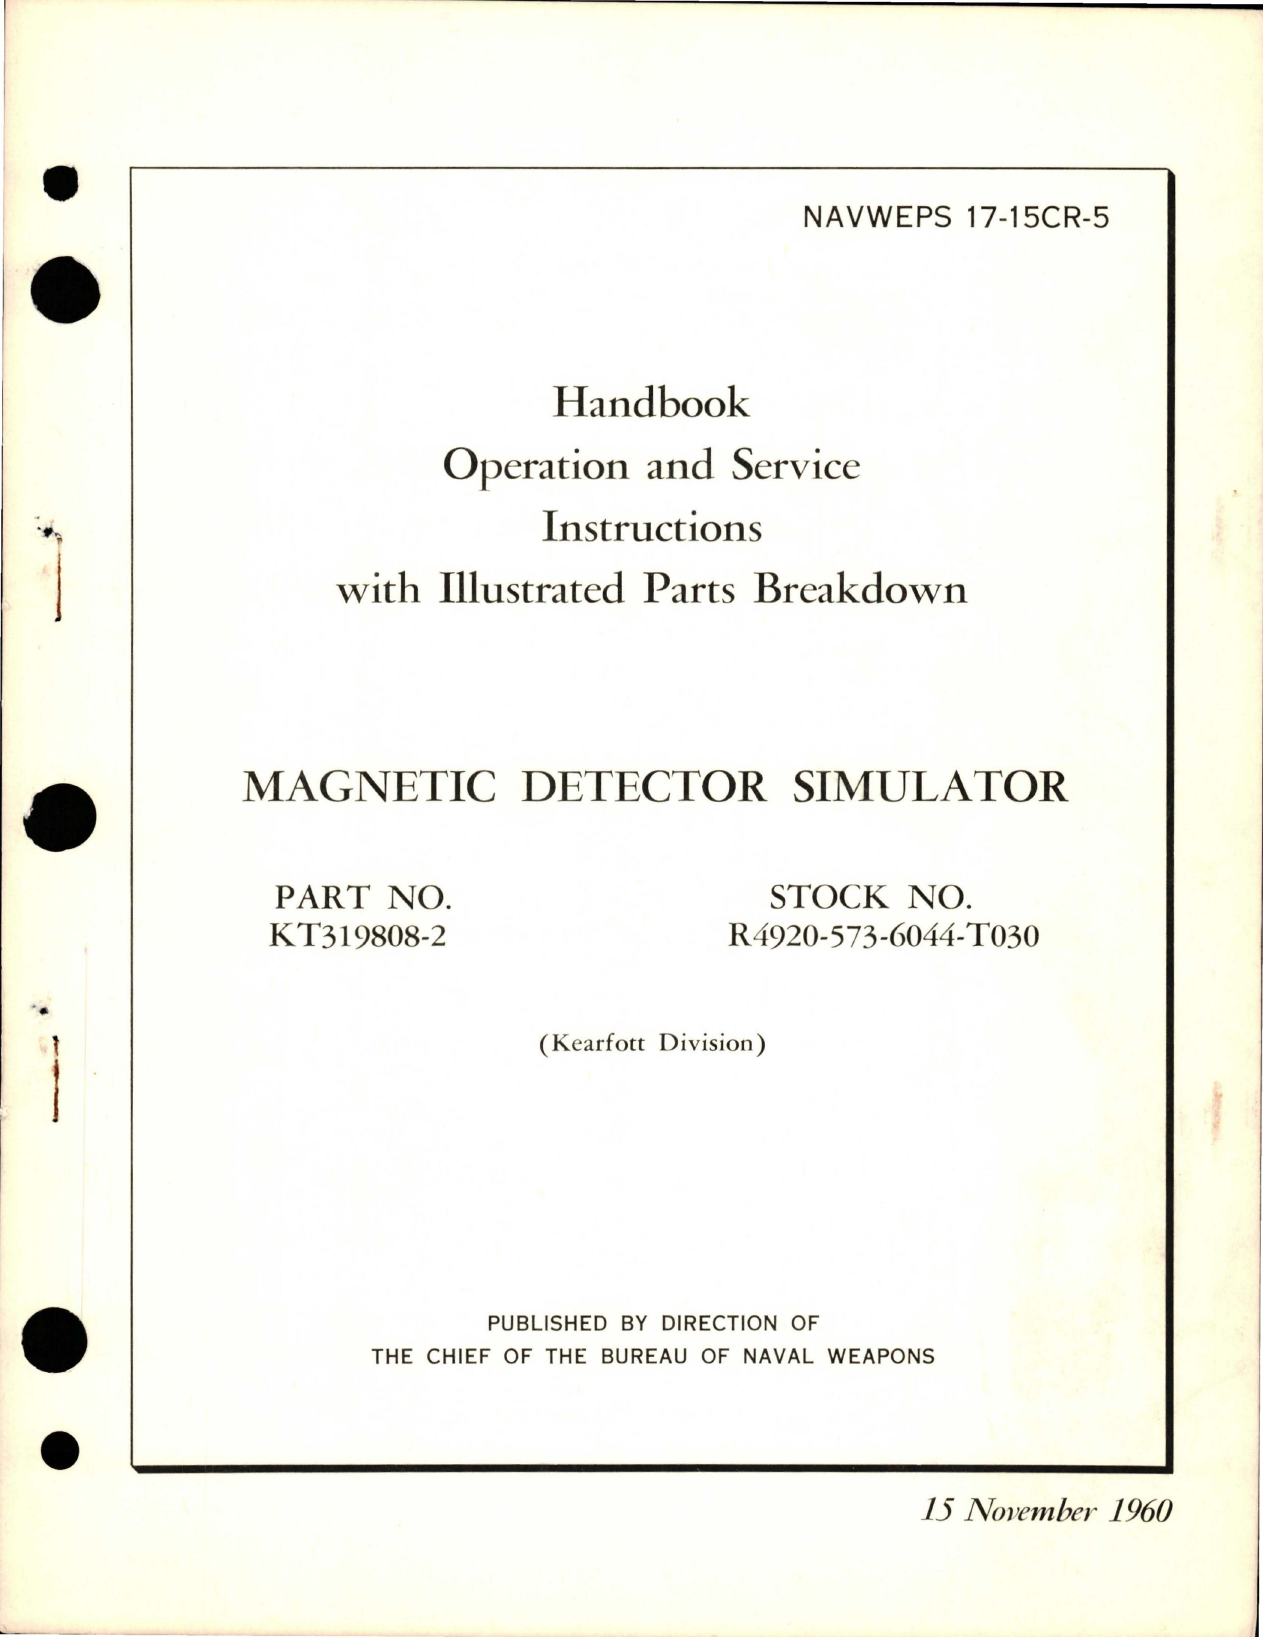 Sample page 1 from AirCorps Library document: Operation and Service Instructions with Illustrated Parts Breakdown for Magnetic Detector Simulator - Part KT319809-2